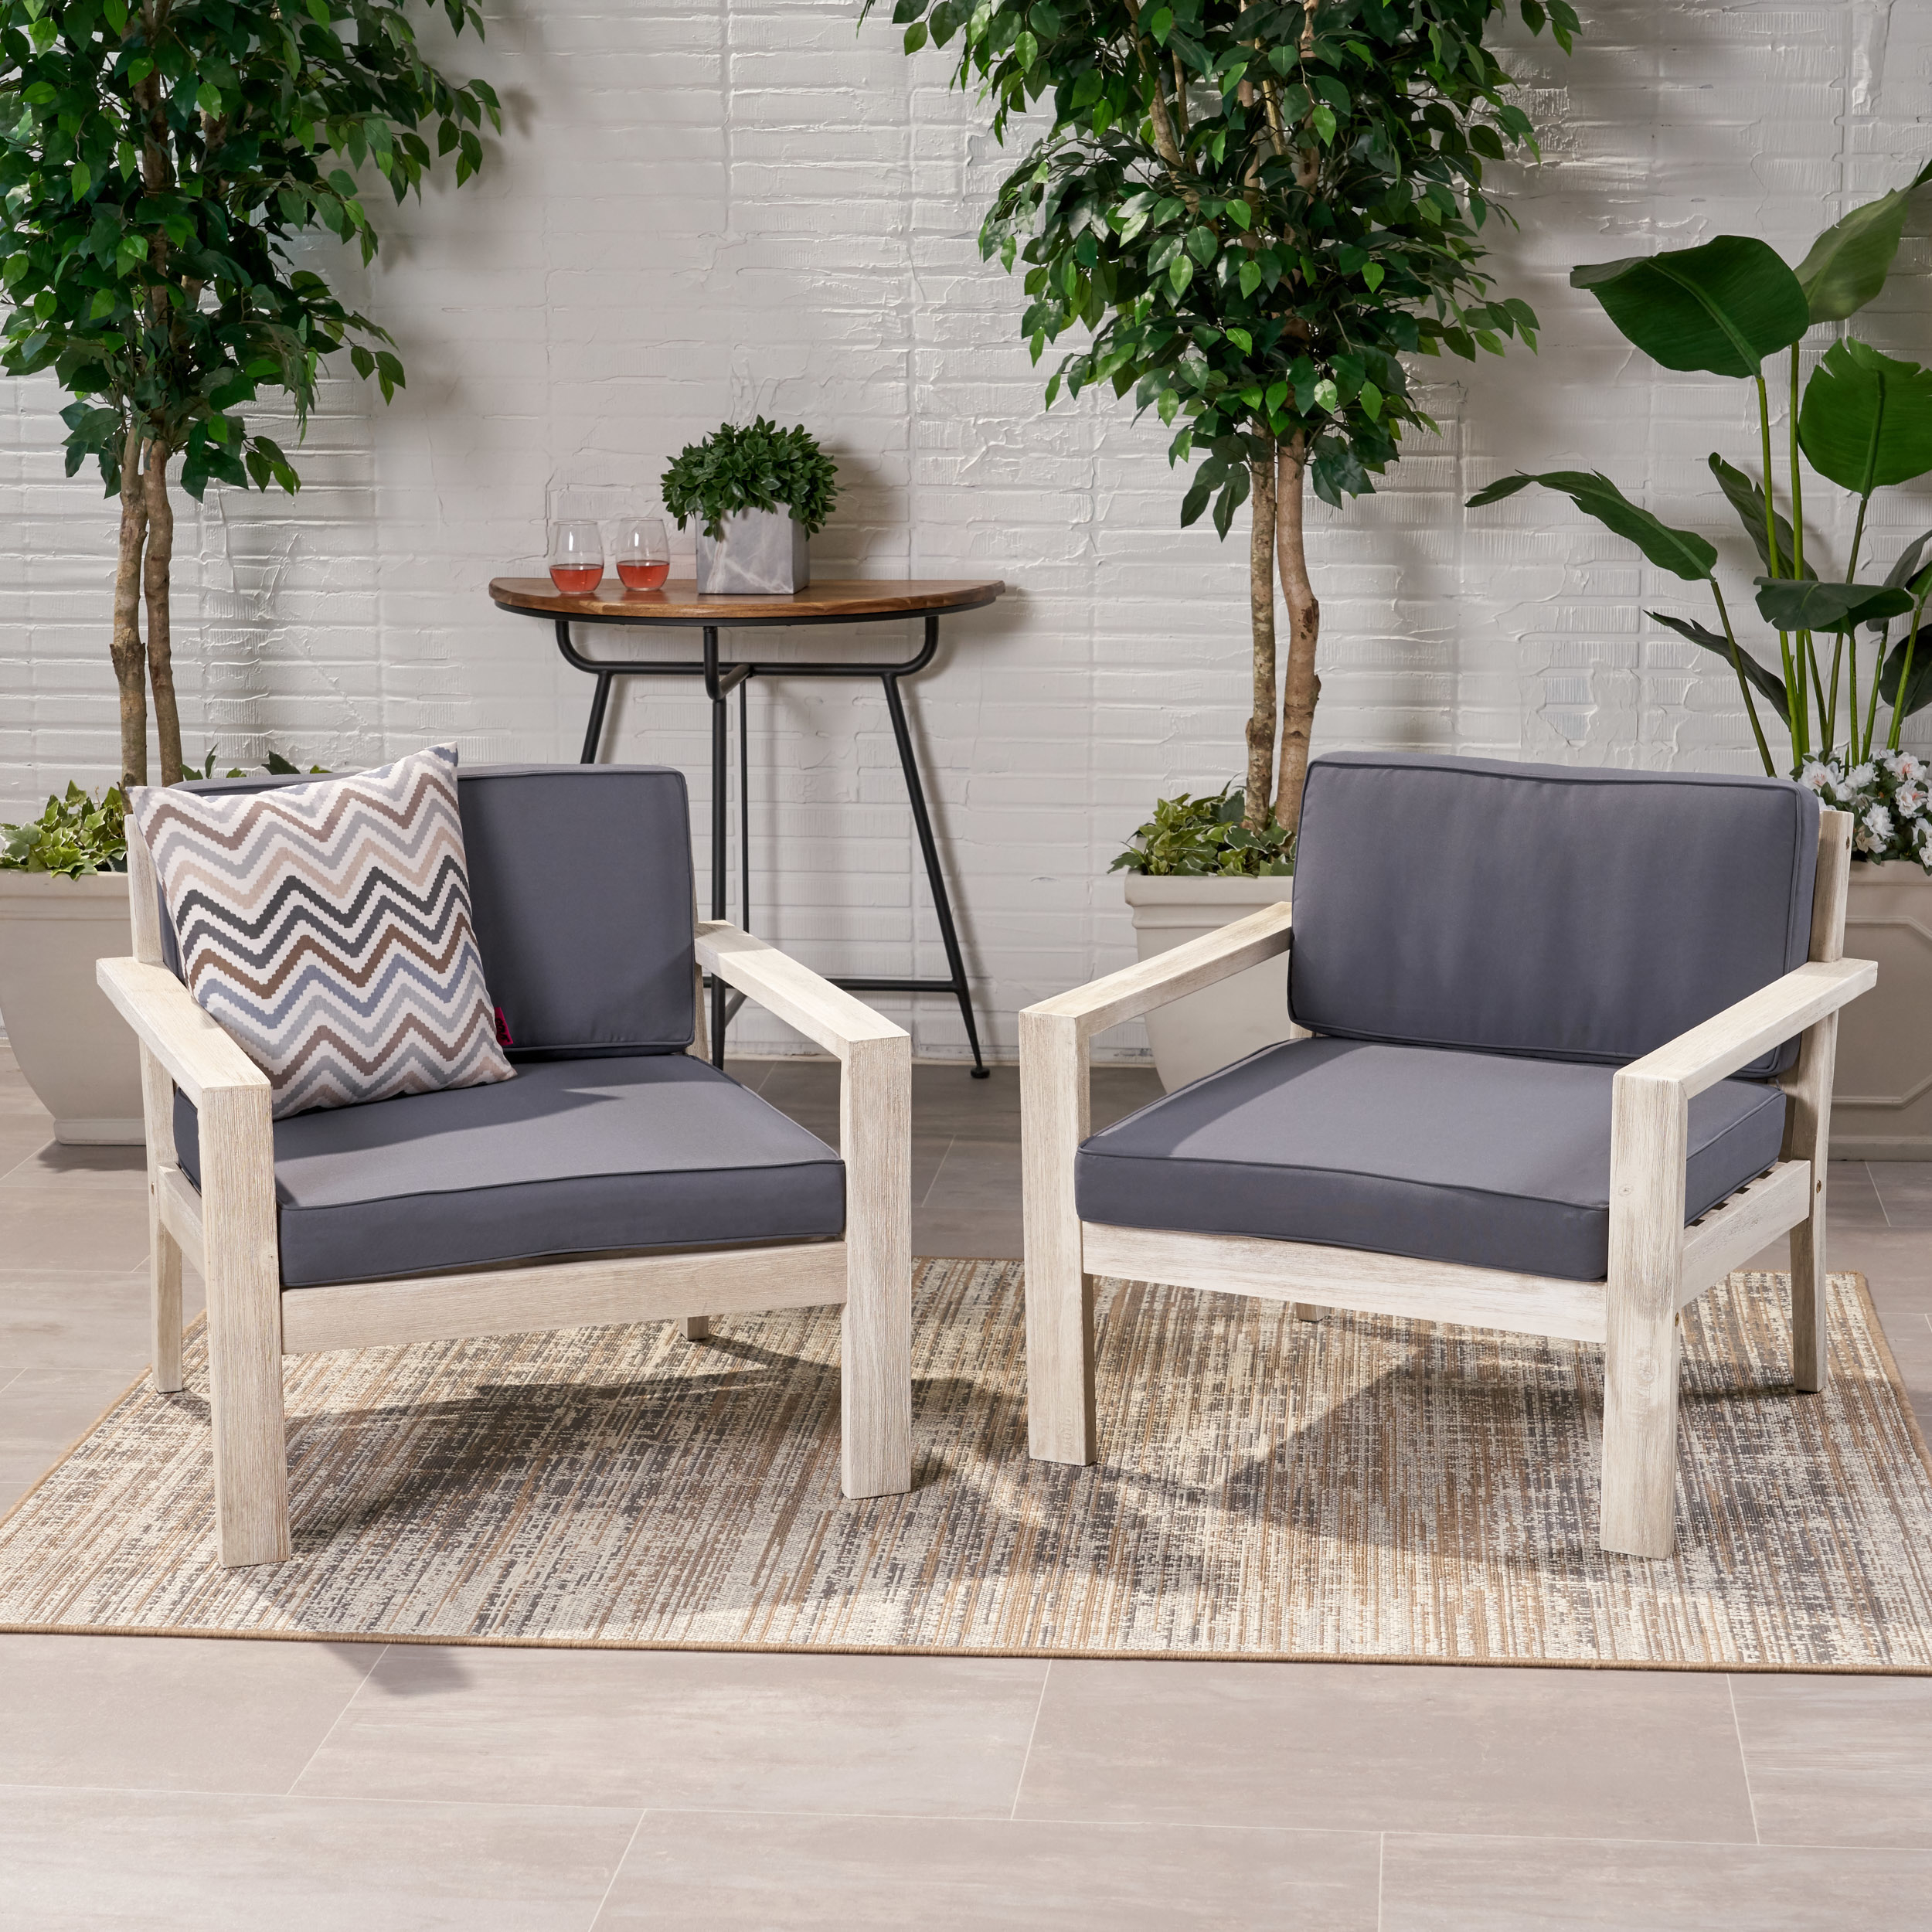 Beryl Outdoor Acacia Wood Club Chairs With Cushions (Set Of 2) - Brushed Light Gray Wash, Teal